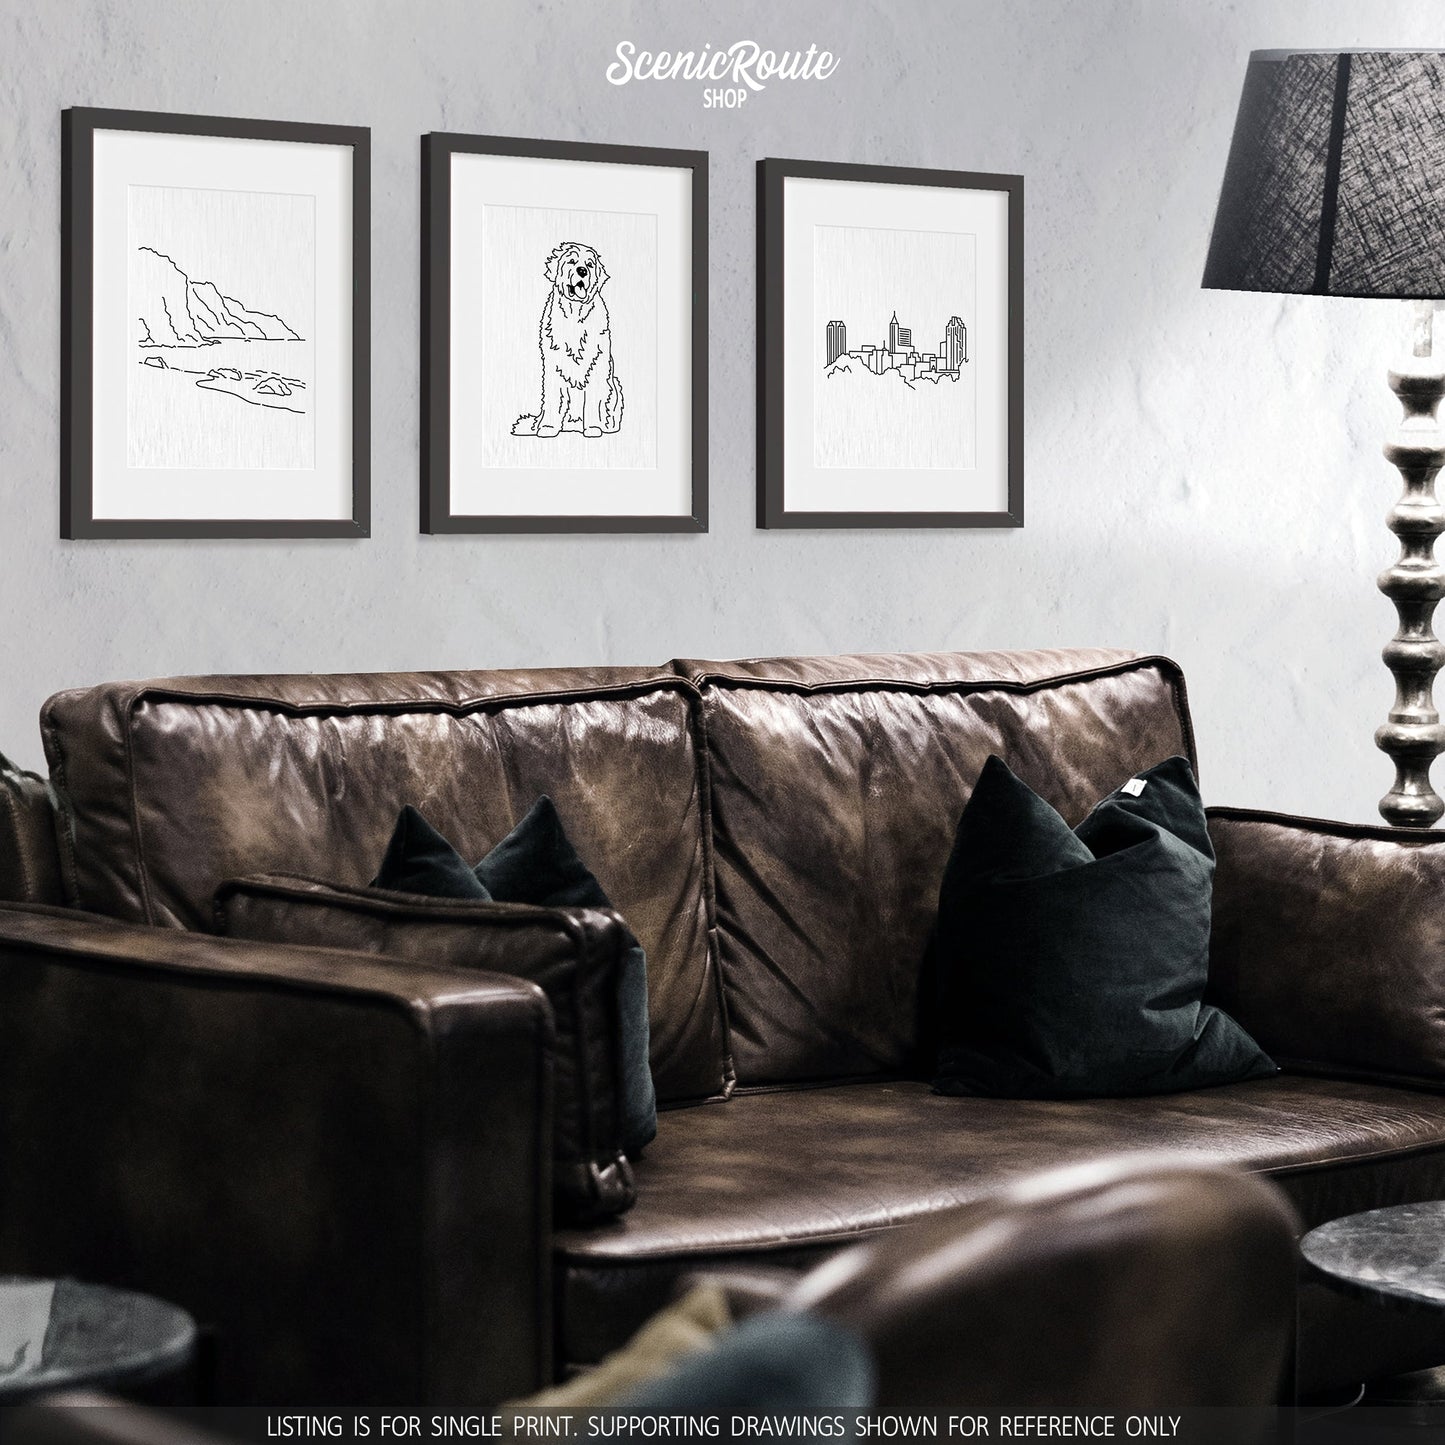 A group of three framed drawings on a white wall above a dark leather couch. The line art drawings include the NaPali Coast, a Newfoundland dog, and the Raleigh Skyline